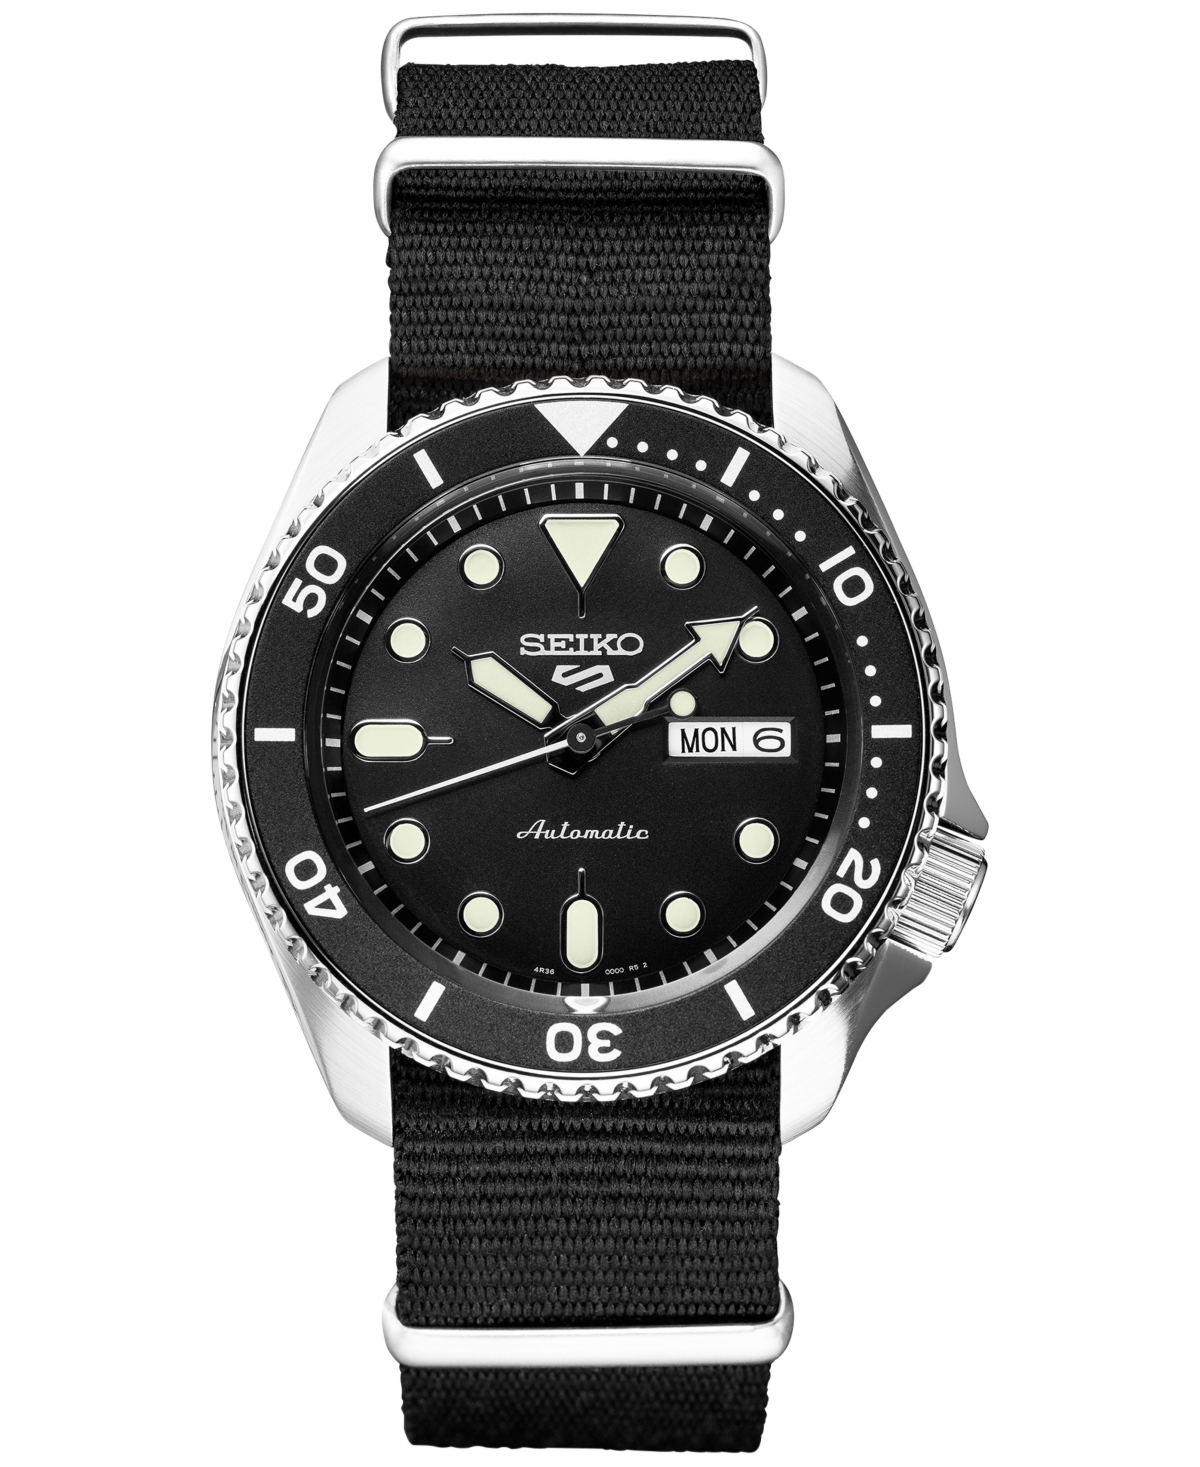 Limited Edition Seiko Men's Automatic 5 Sports Black Nylon Strap Watch 42.5mm, Created for Macy's - Black